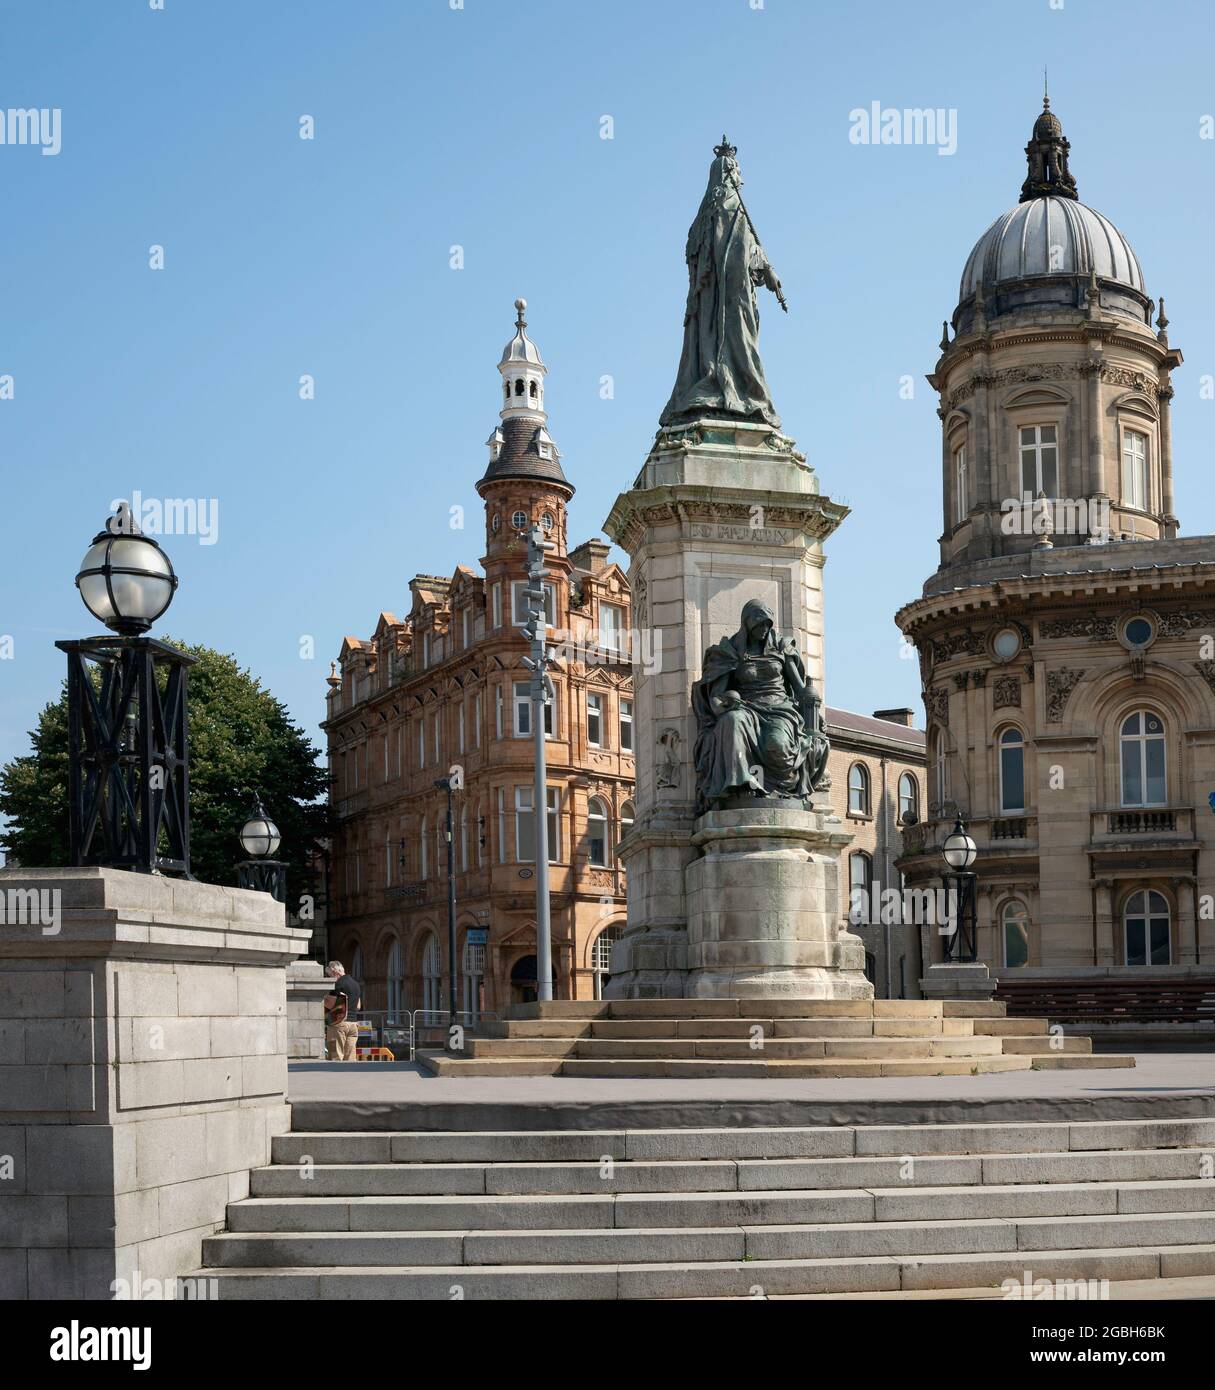 Victoria Square with prominent landmarks such as statues, buildings  and tourist attractions in city centre. Hull, UK. Stock Photo